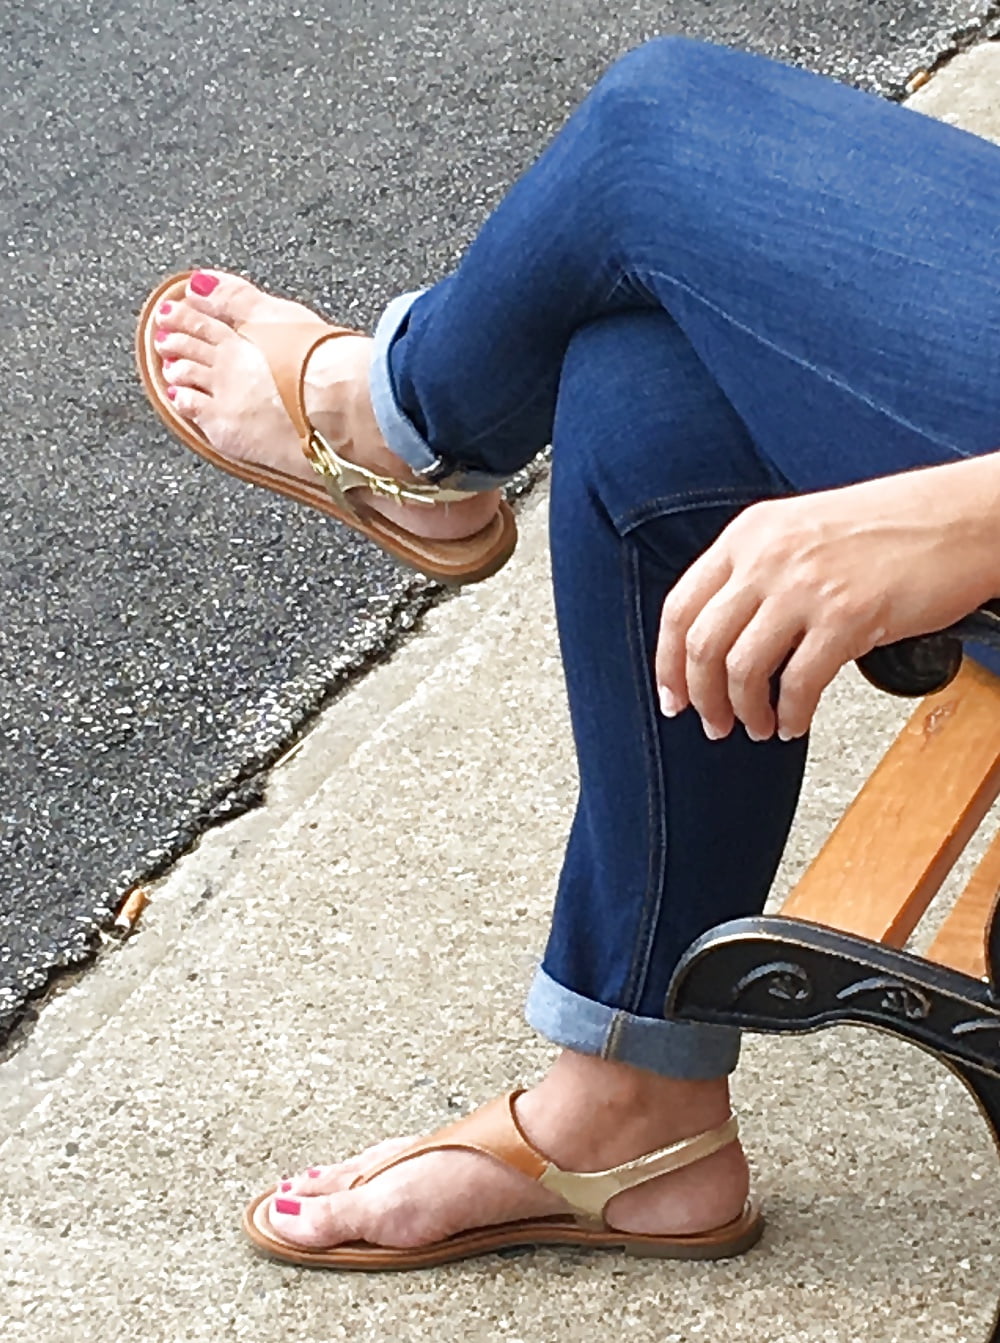 Candid Feet and Legs, Julie pict gal